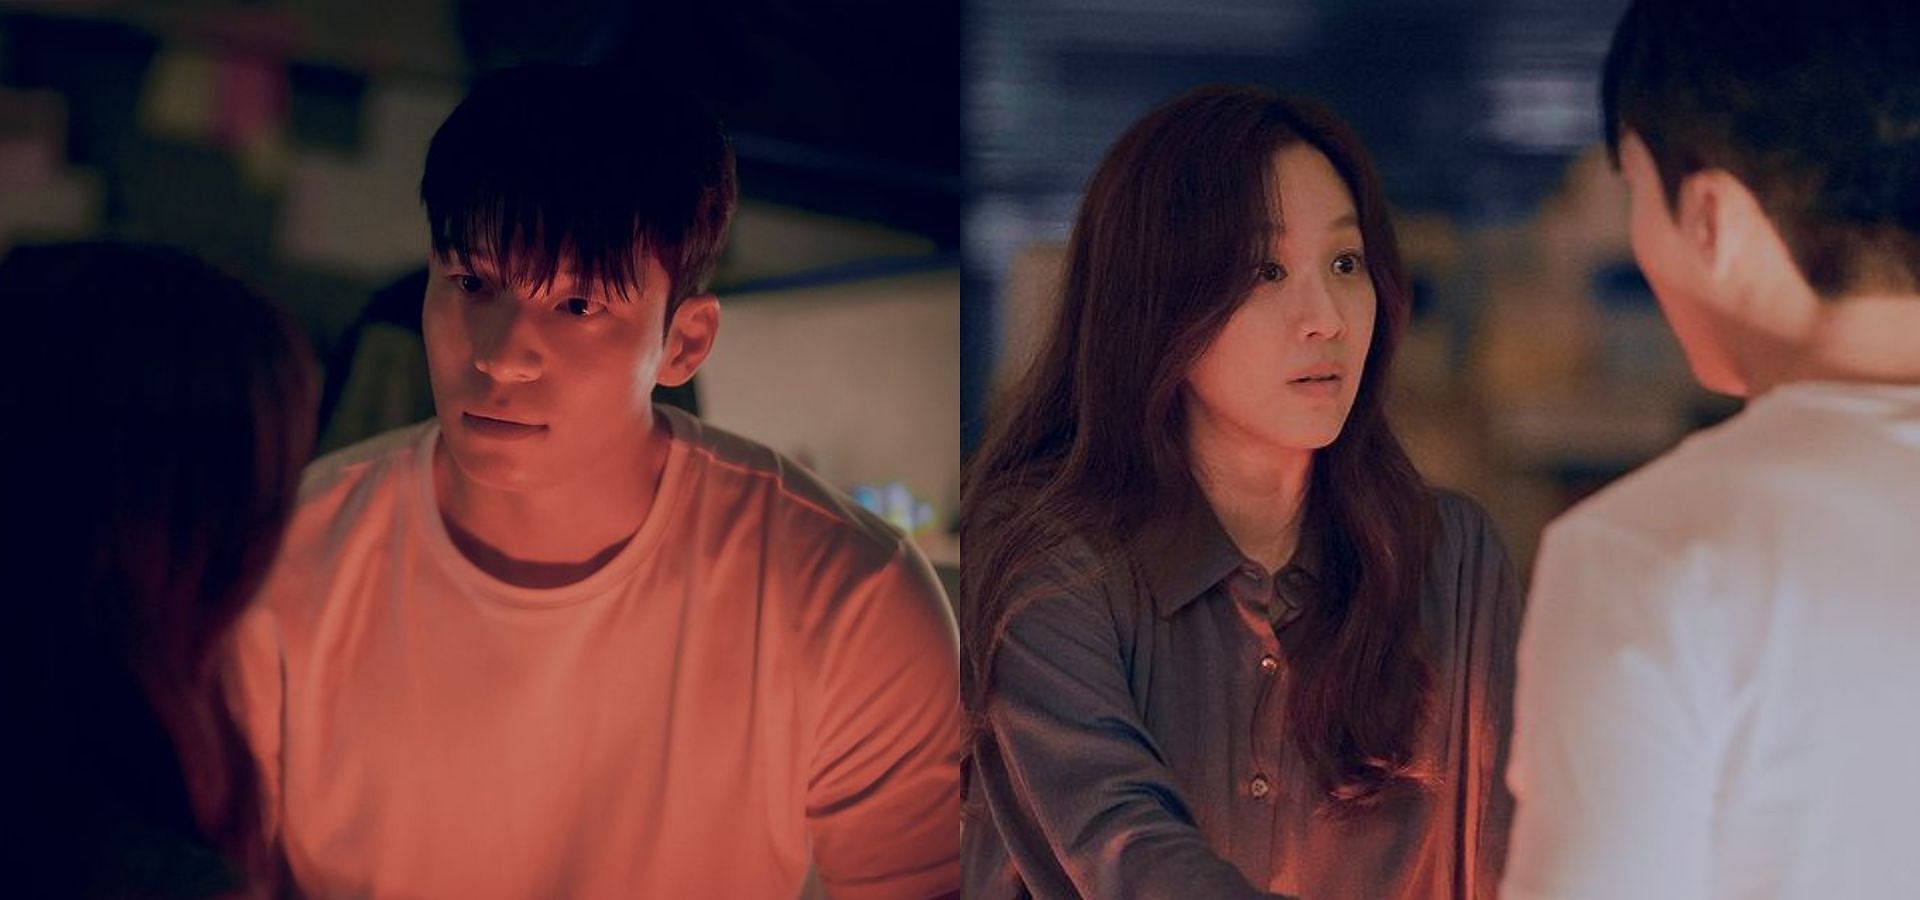 The Midnight Romance In Hagwon episodes 5 &amp; 6 recap featuring Wi Ha-joon and Jung Ryeo-won (Images Via Instagram/@tvn_drama) 